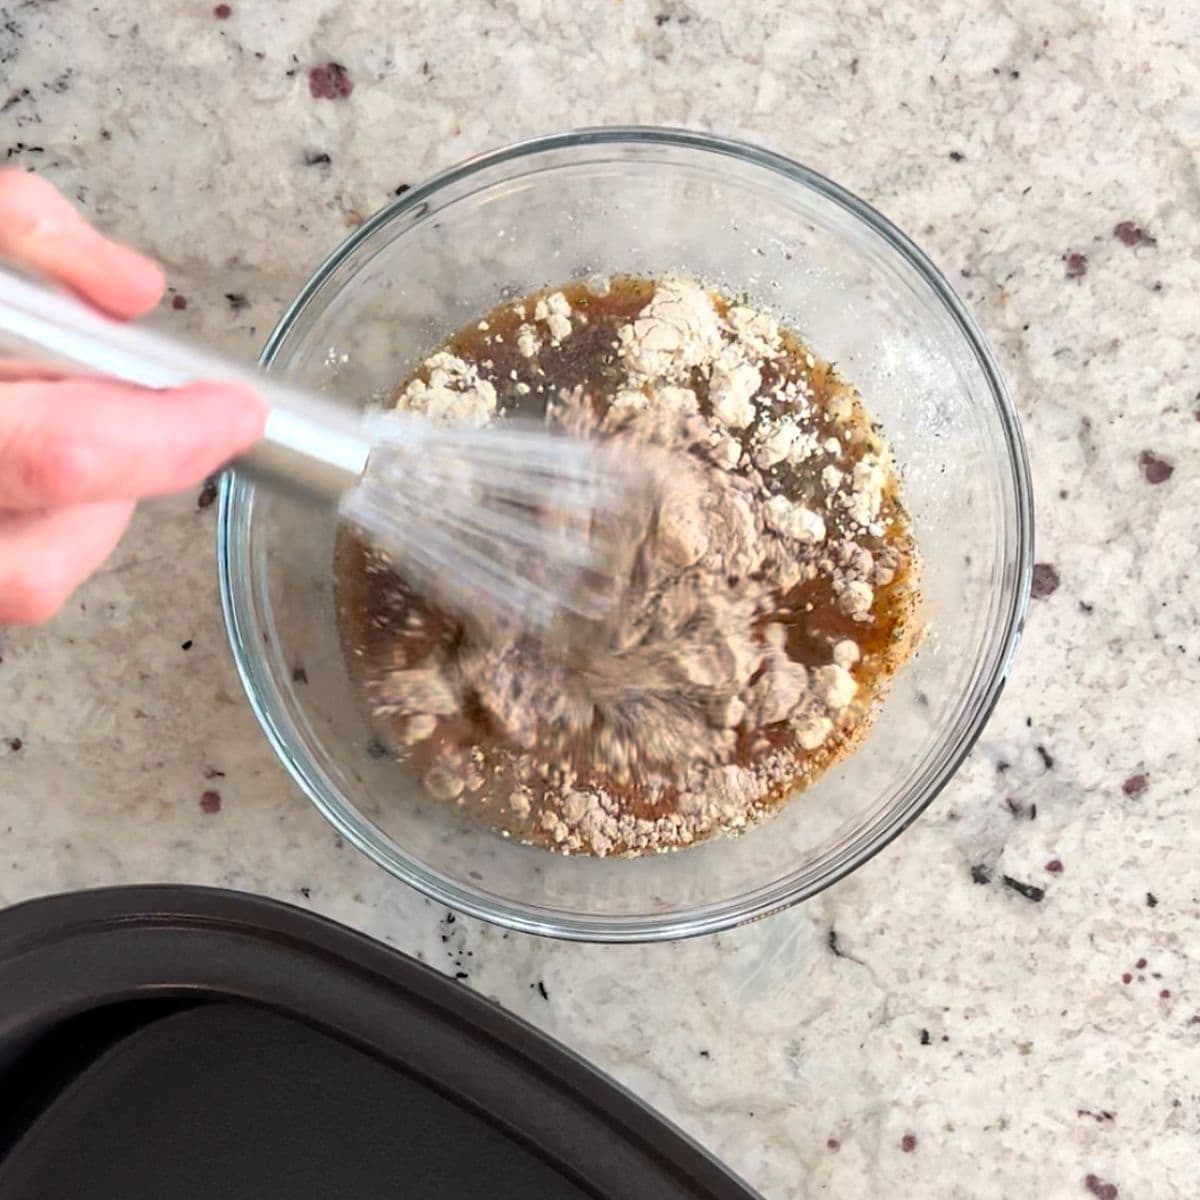 Whisking the sauce and seasoning in a clear glass bowl.